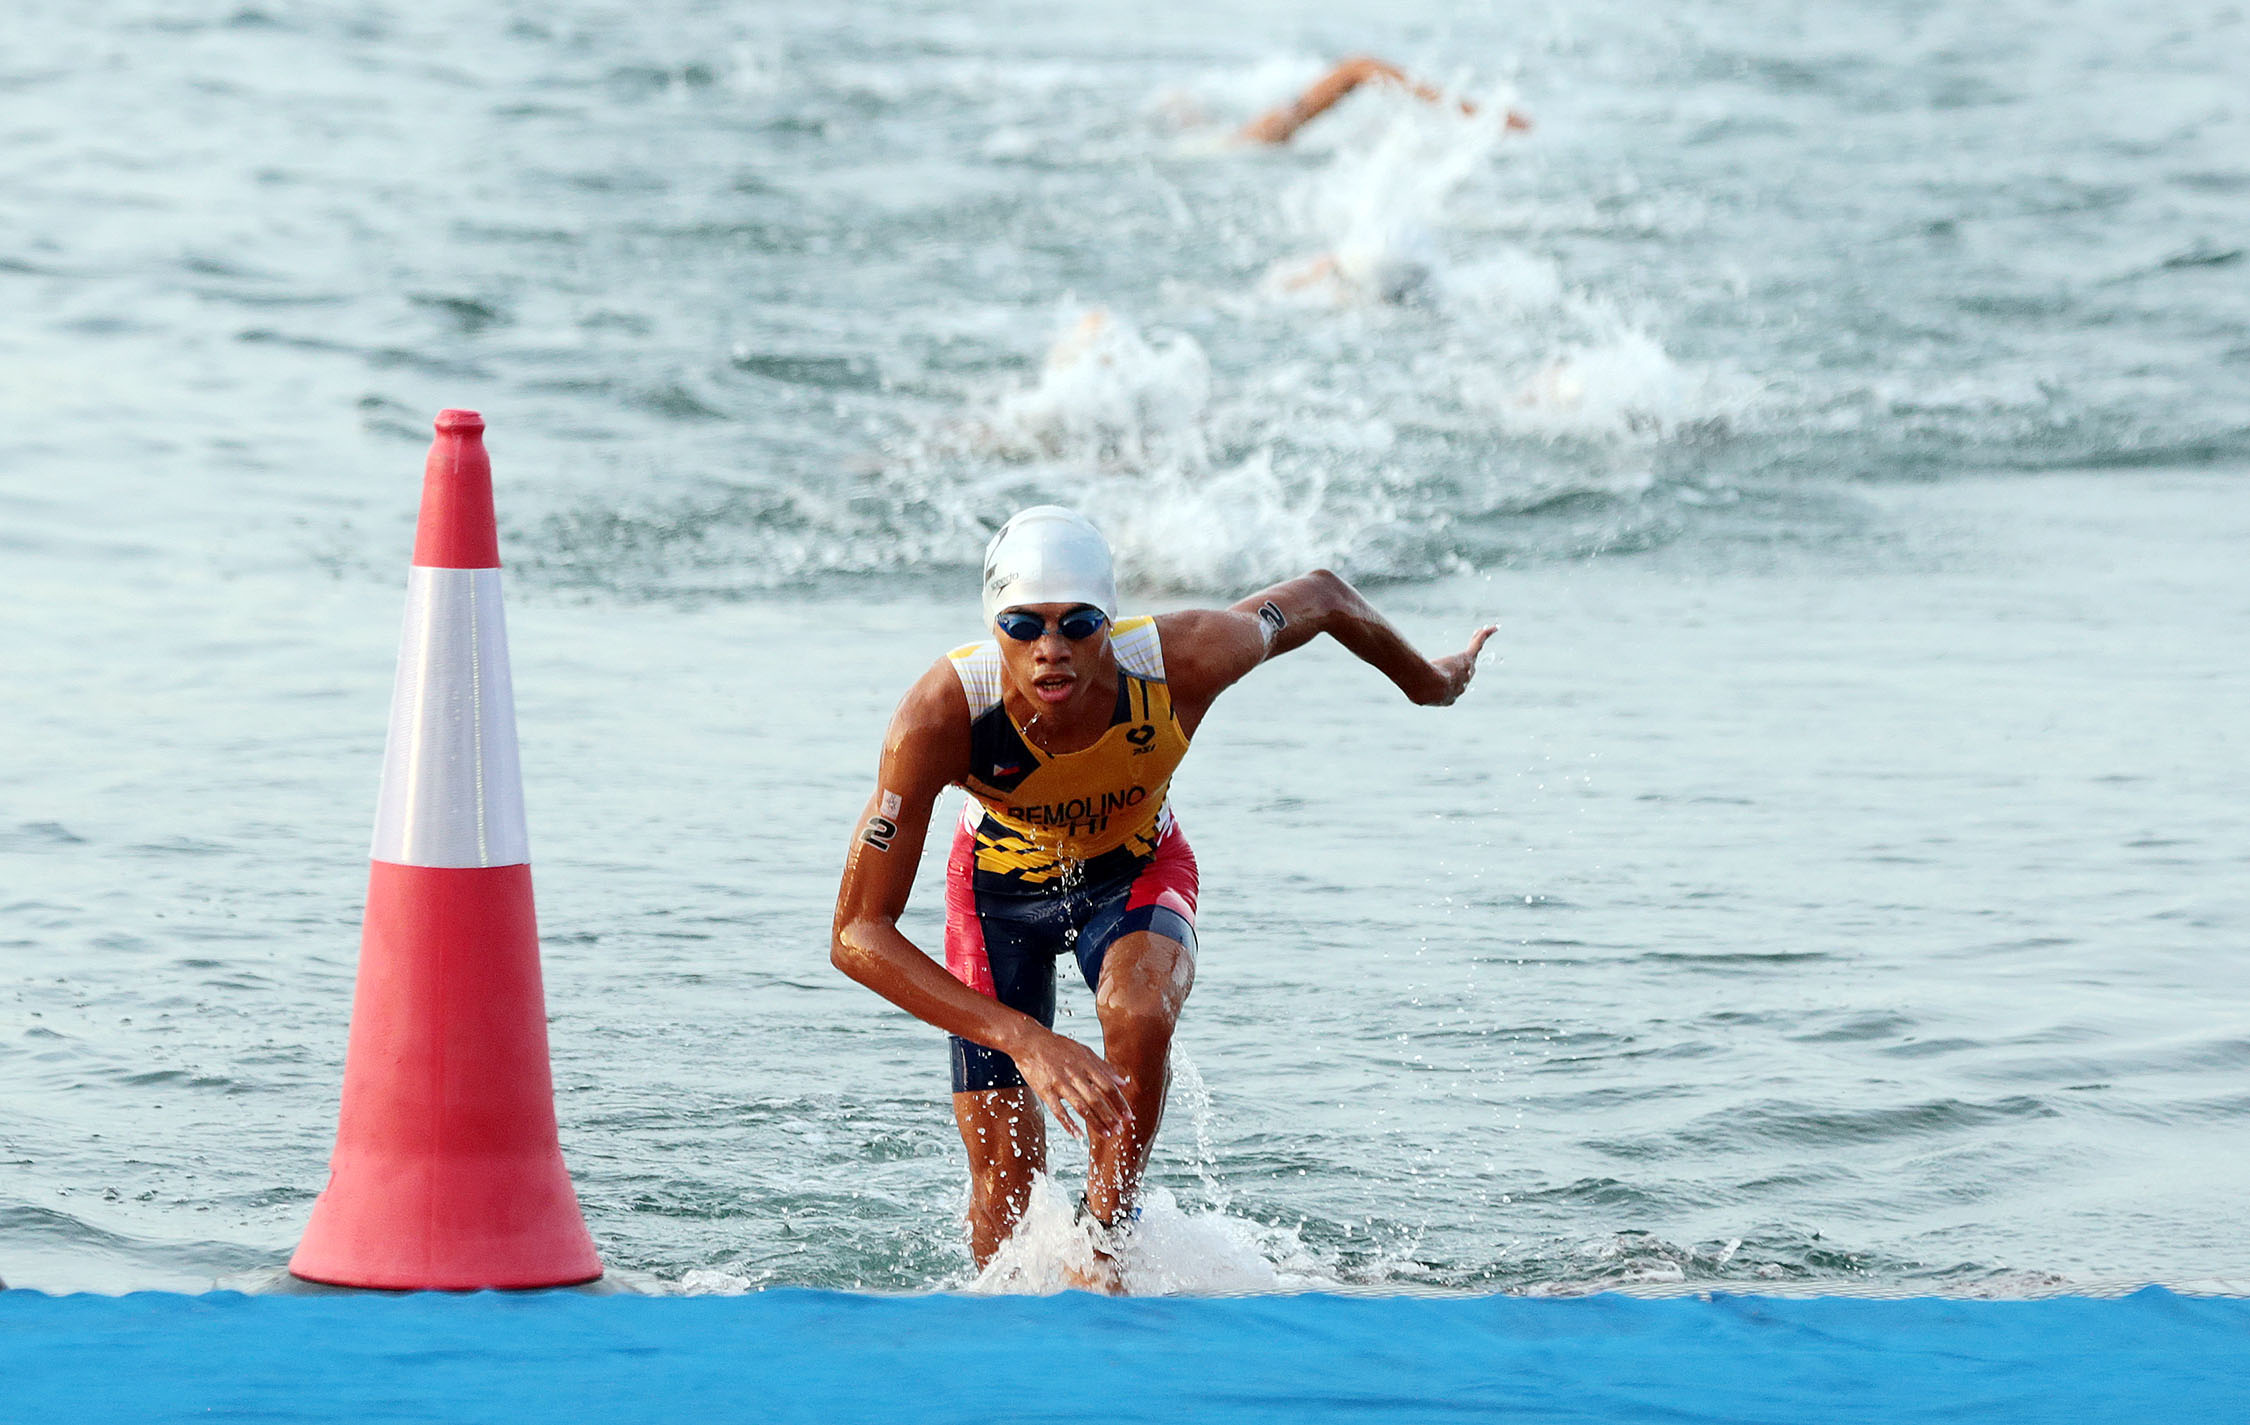 TAKING THE LEAD / DECEMBER 1, 2019Filipino triathlete Andrew Remolino emerges from the water as other competitors trail behind during the Triathlon event of the 30th SEA Games in Subic, Zambales on Sunday, December 1, 2019.
INQUIRER PHOTO / GRIG C. MONTEGRANDE